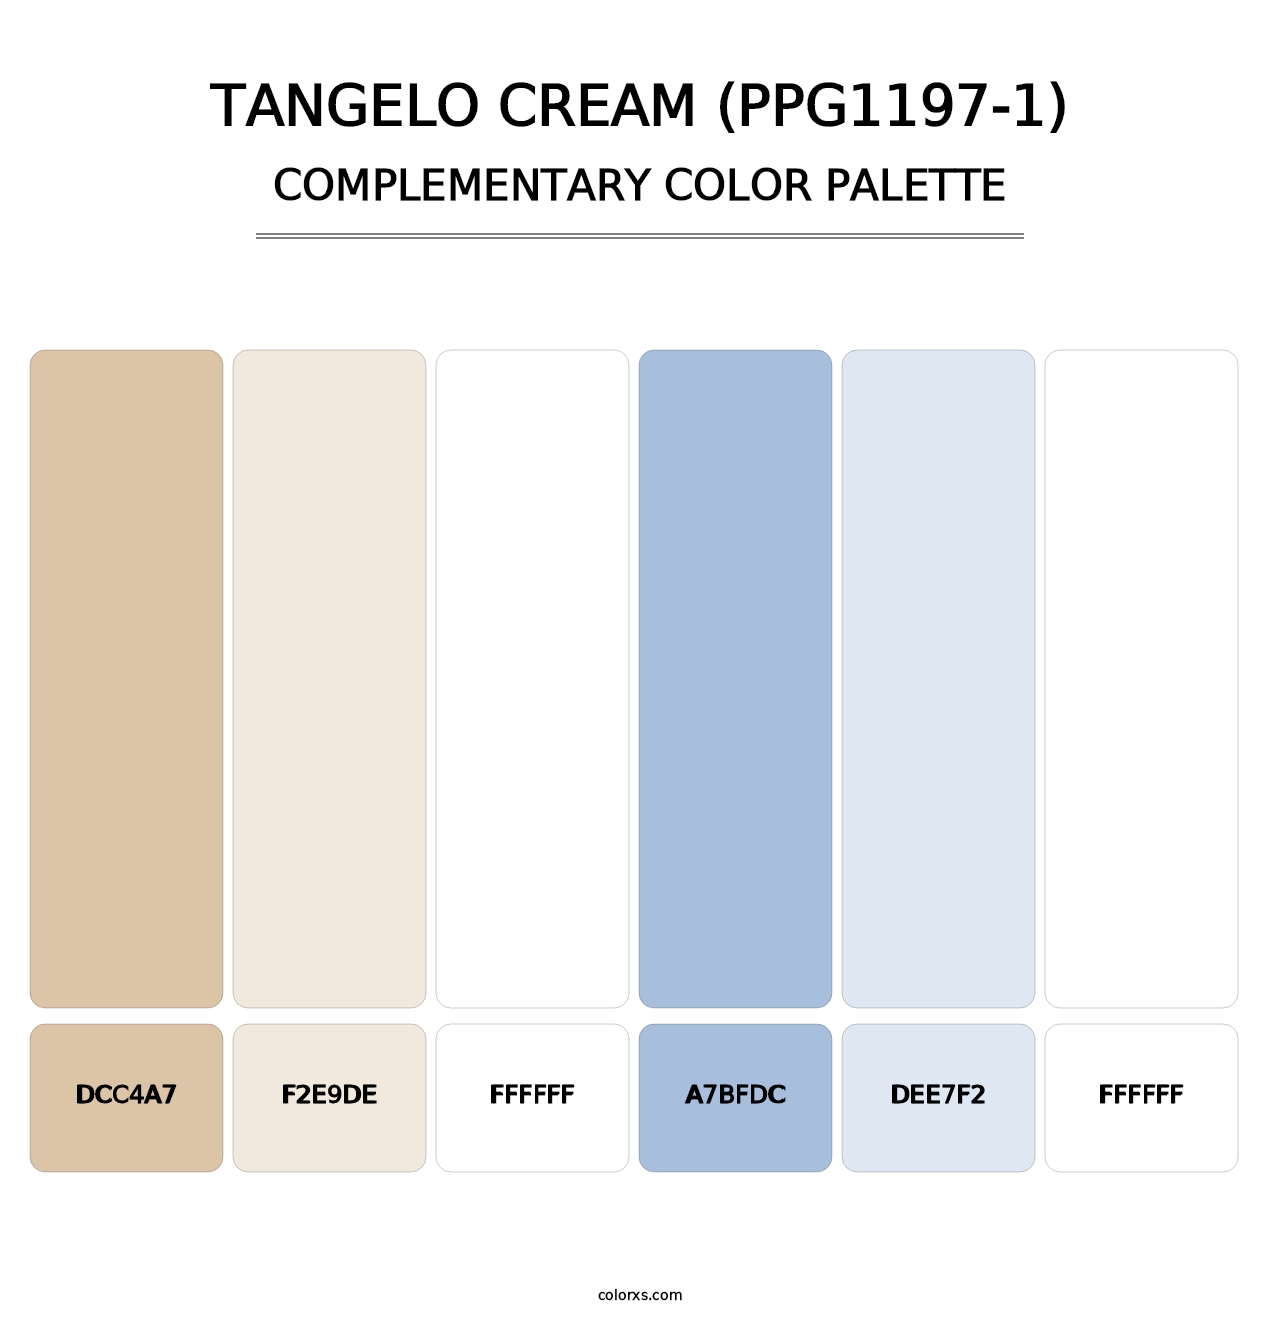 Tangelo Cream (PPG1197-1) - Complementary Color Palette